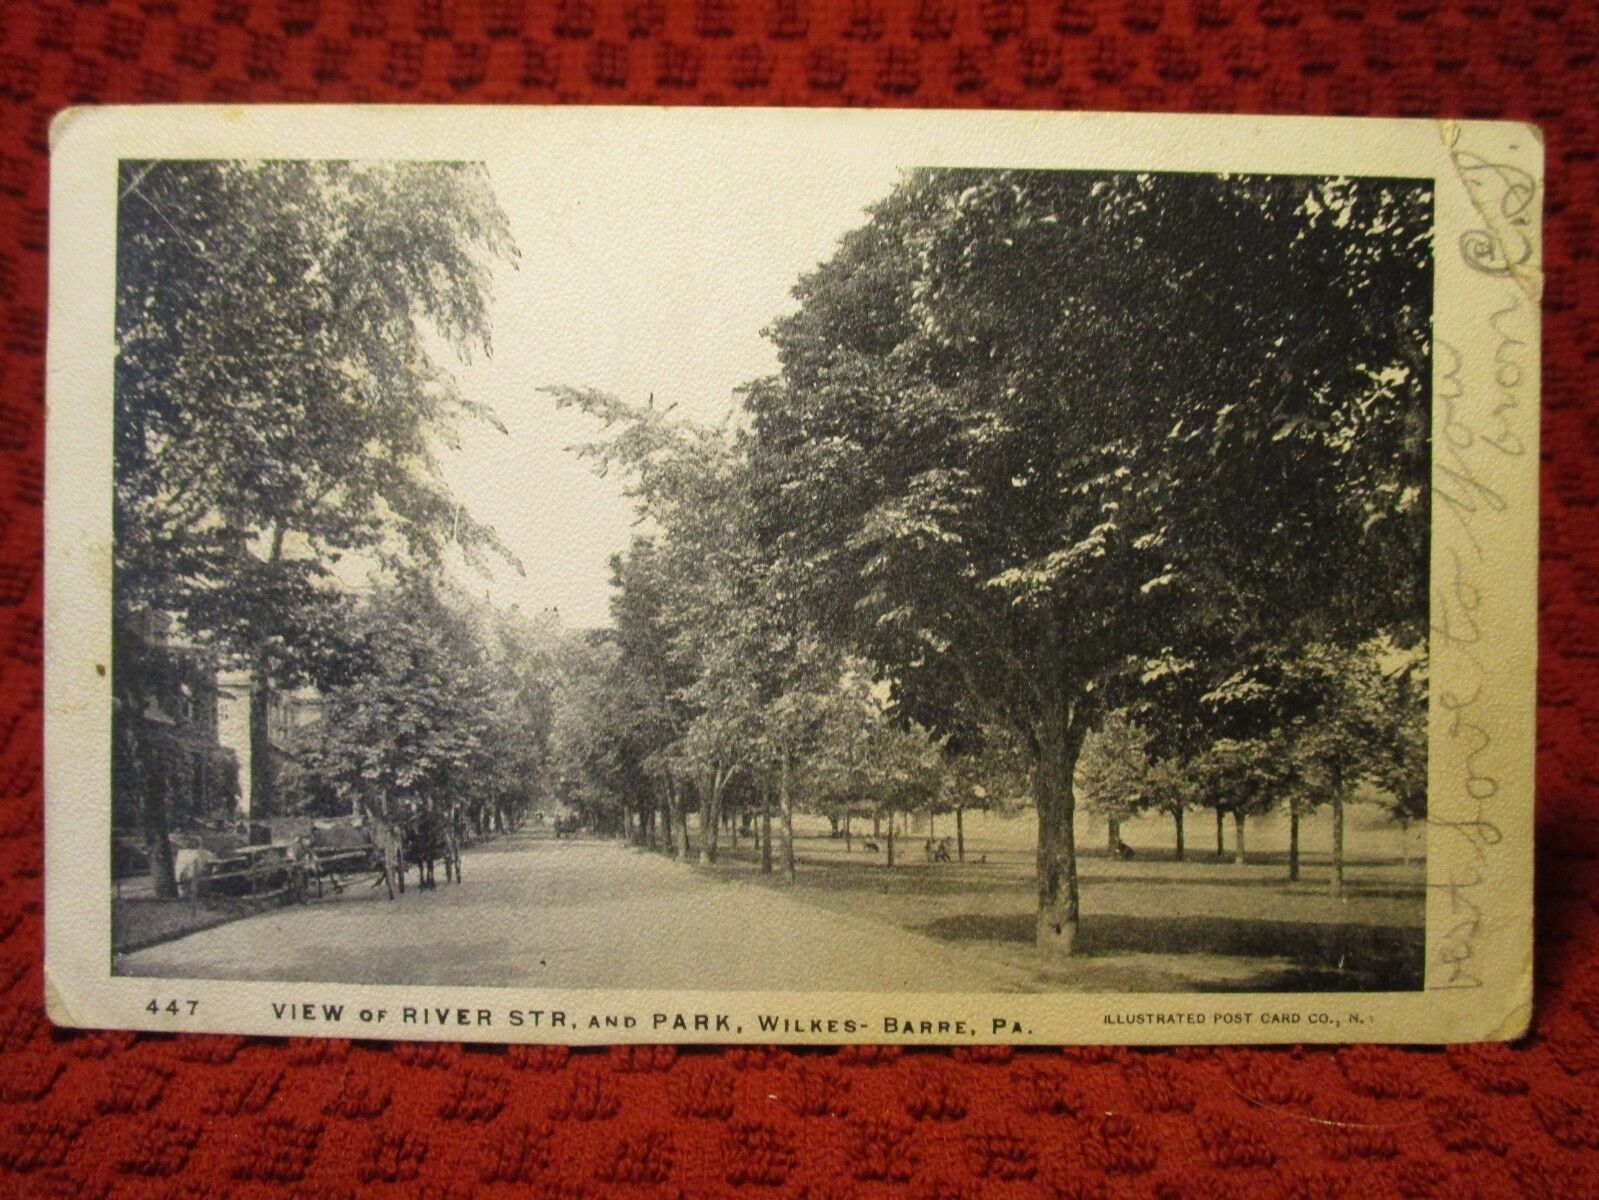 1907. RIVER STREET AND PARK. WILKES-BARRE, PA. POSTCARD J12